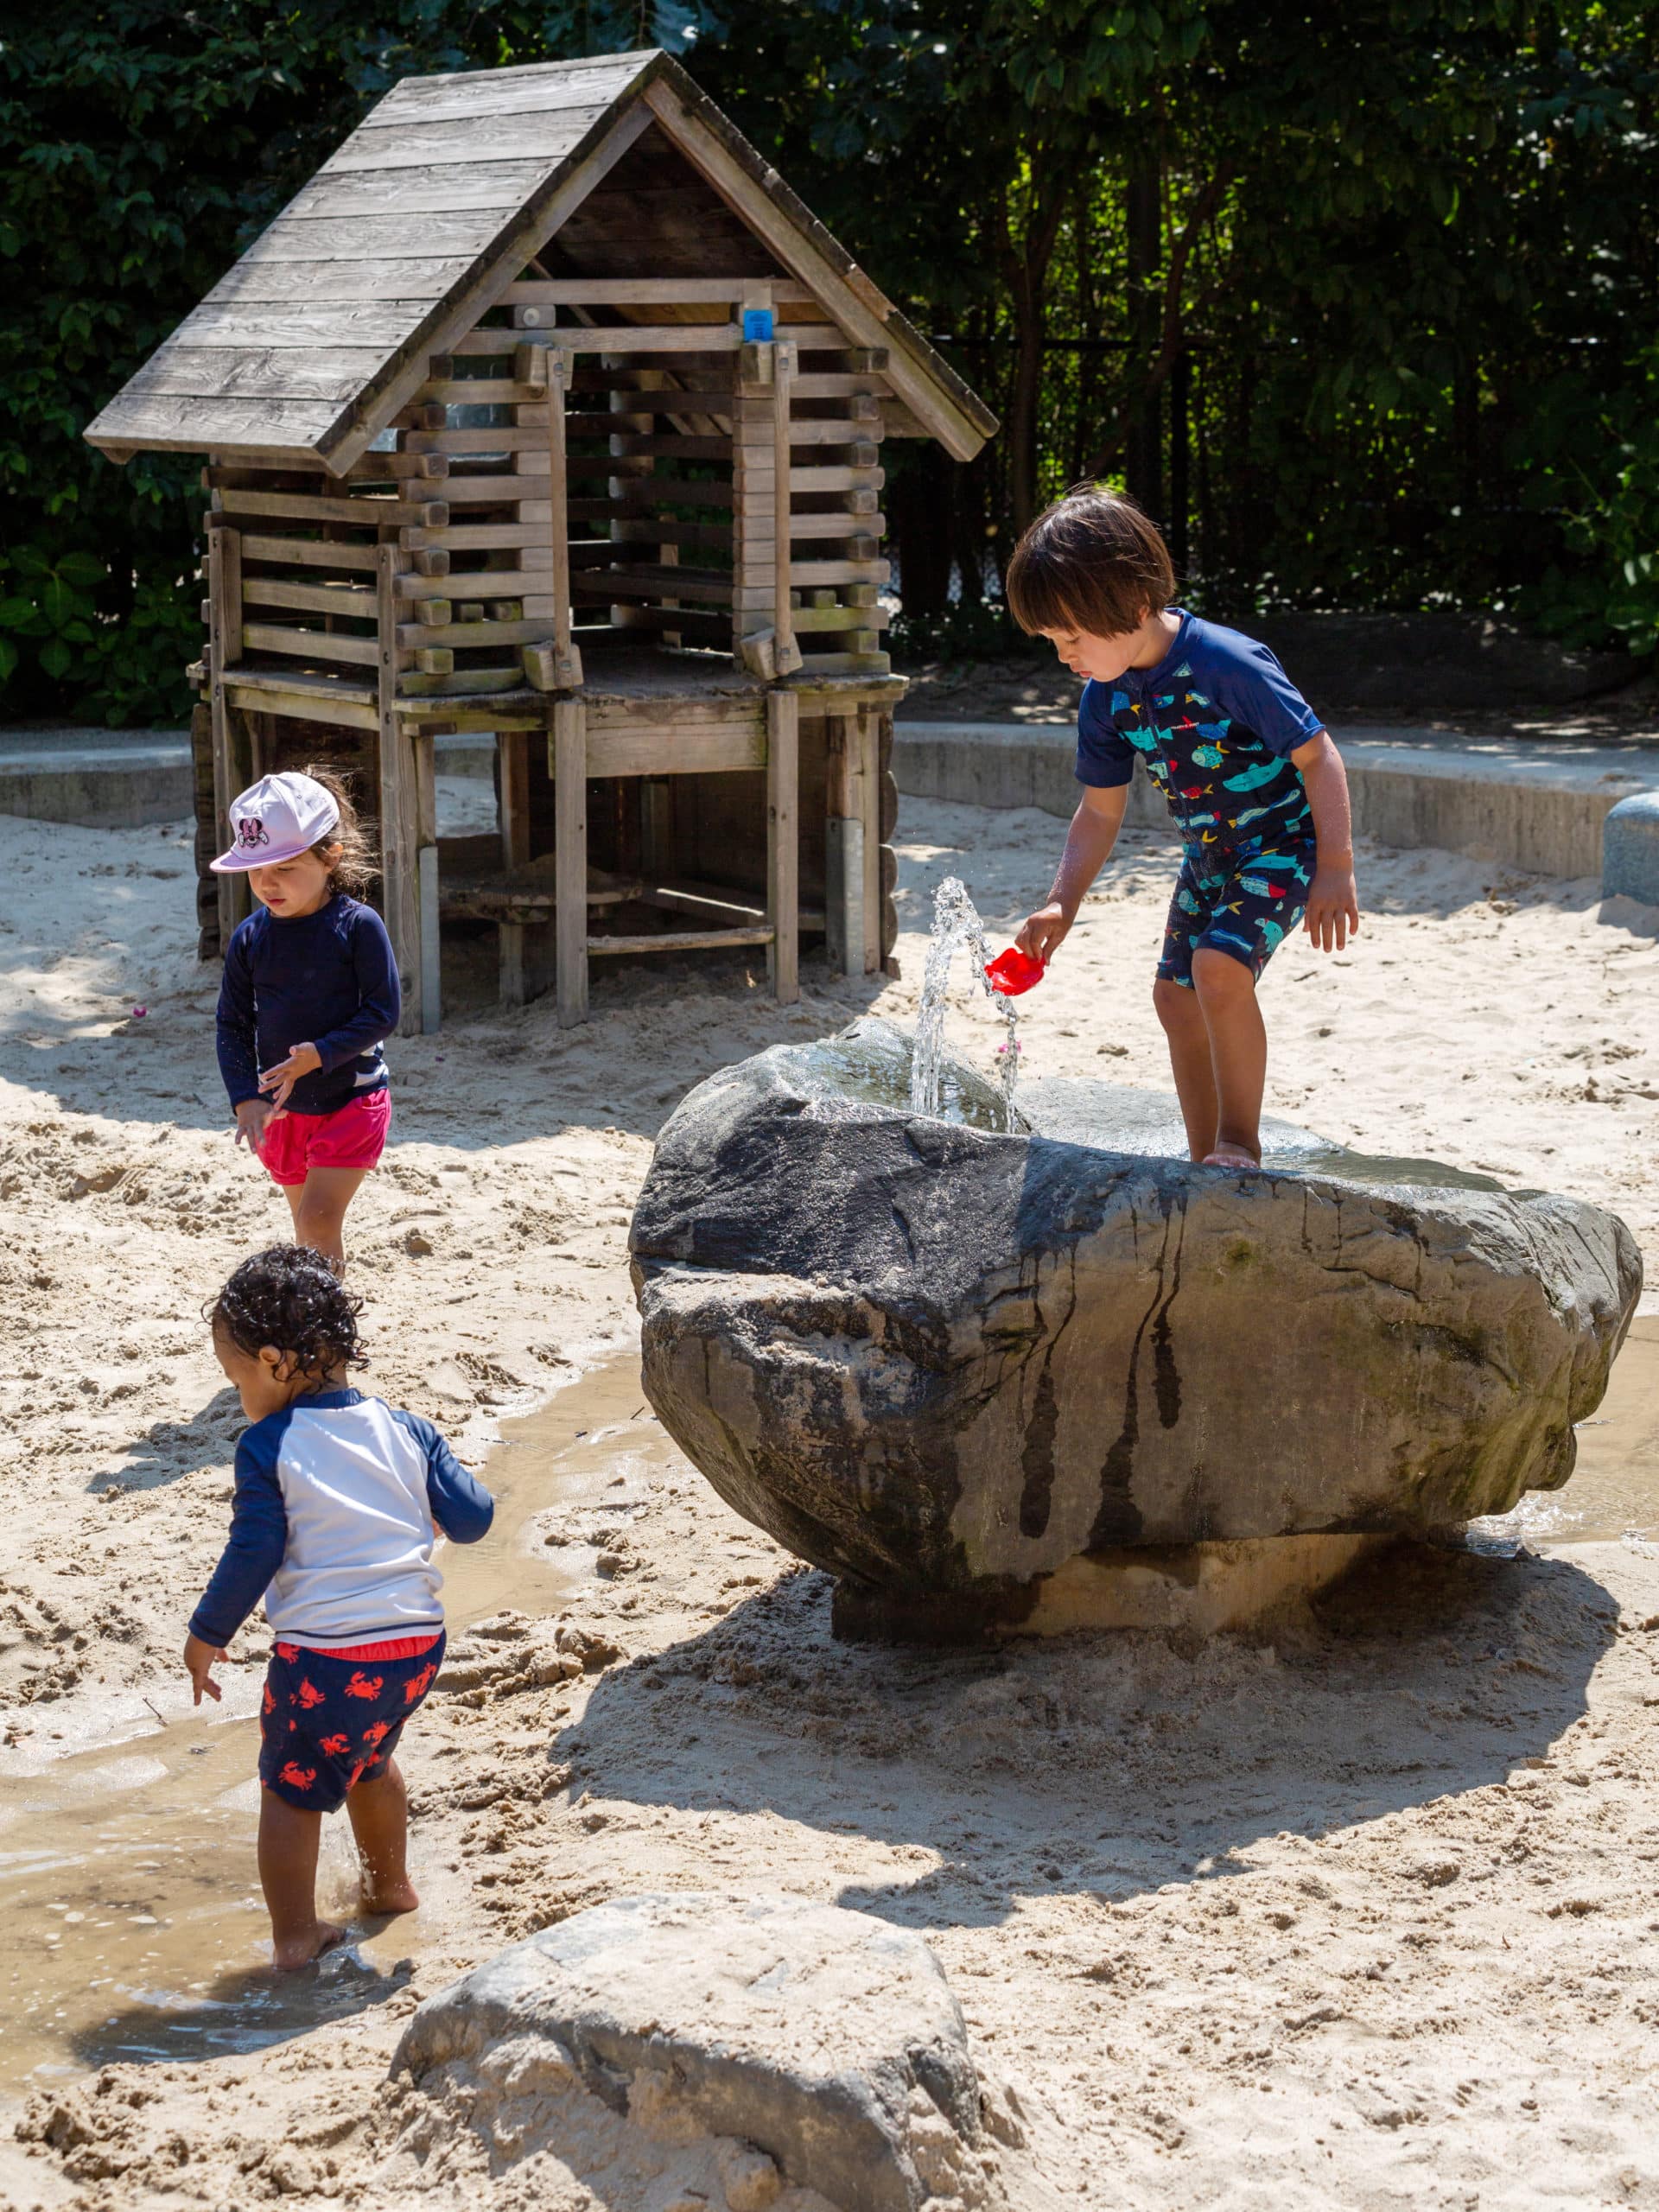 Small children playing with water in the sand pit at Sandbox Village in Pier 6 on a sunny day.